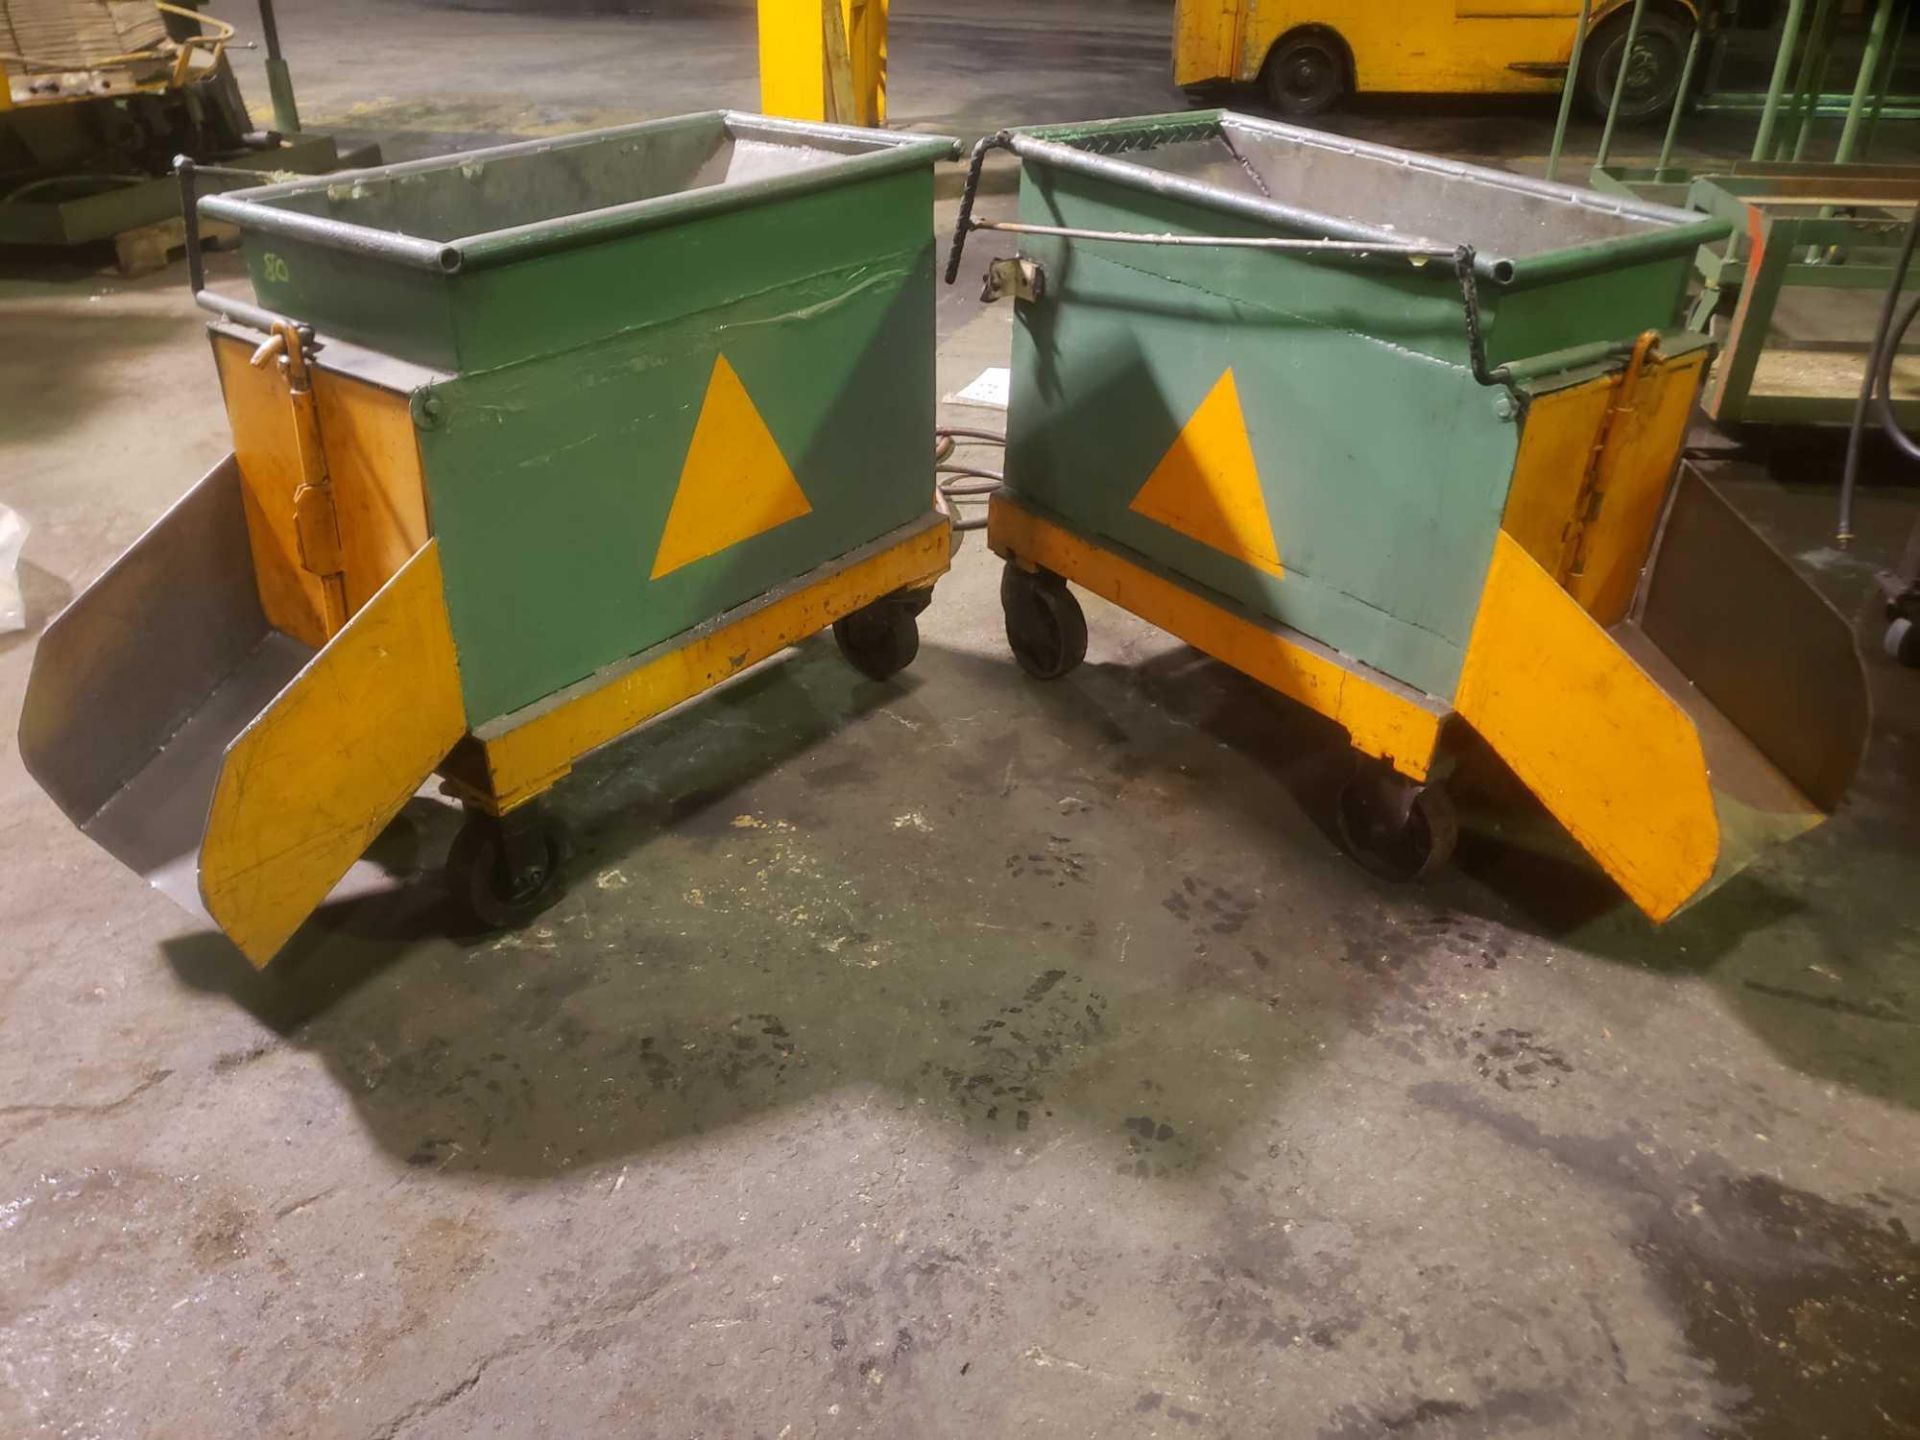 Mini parts hoppers on casters